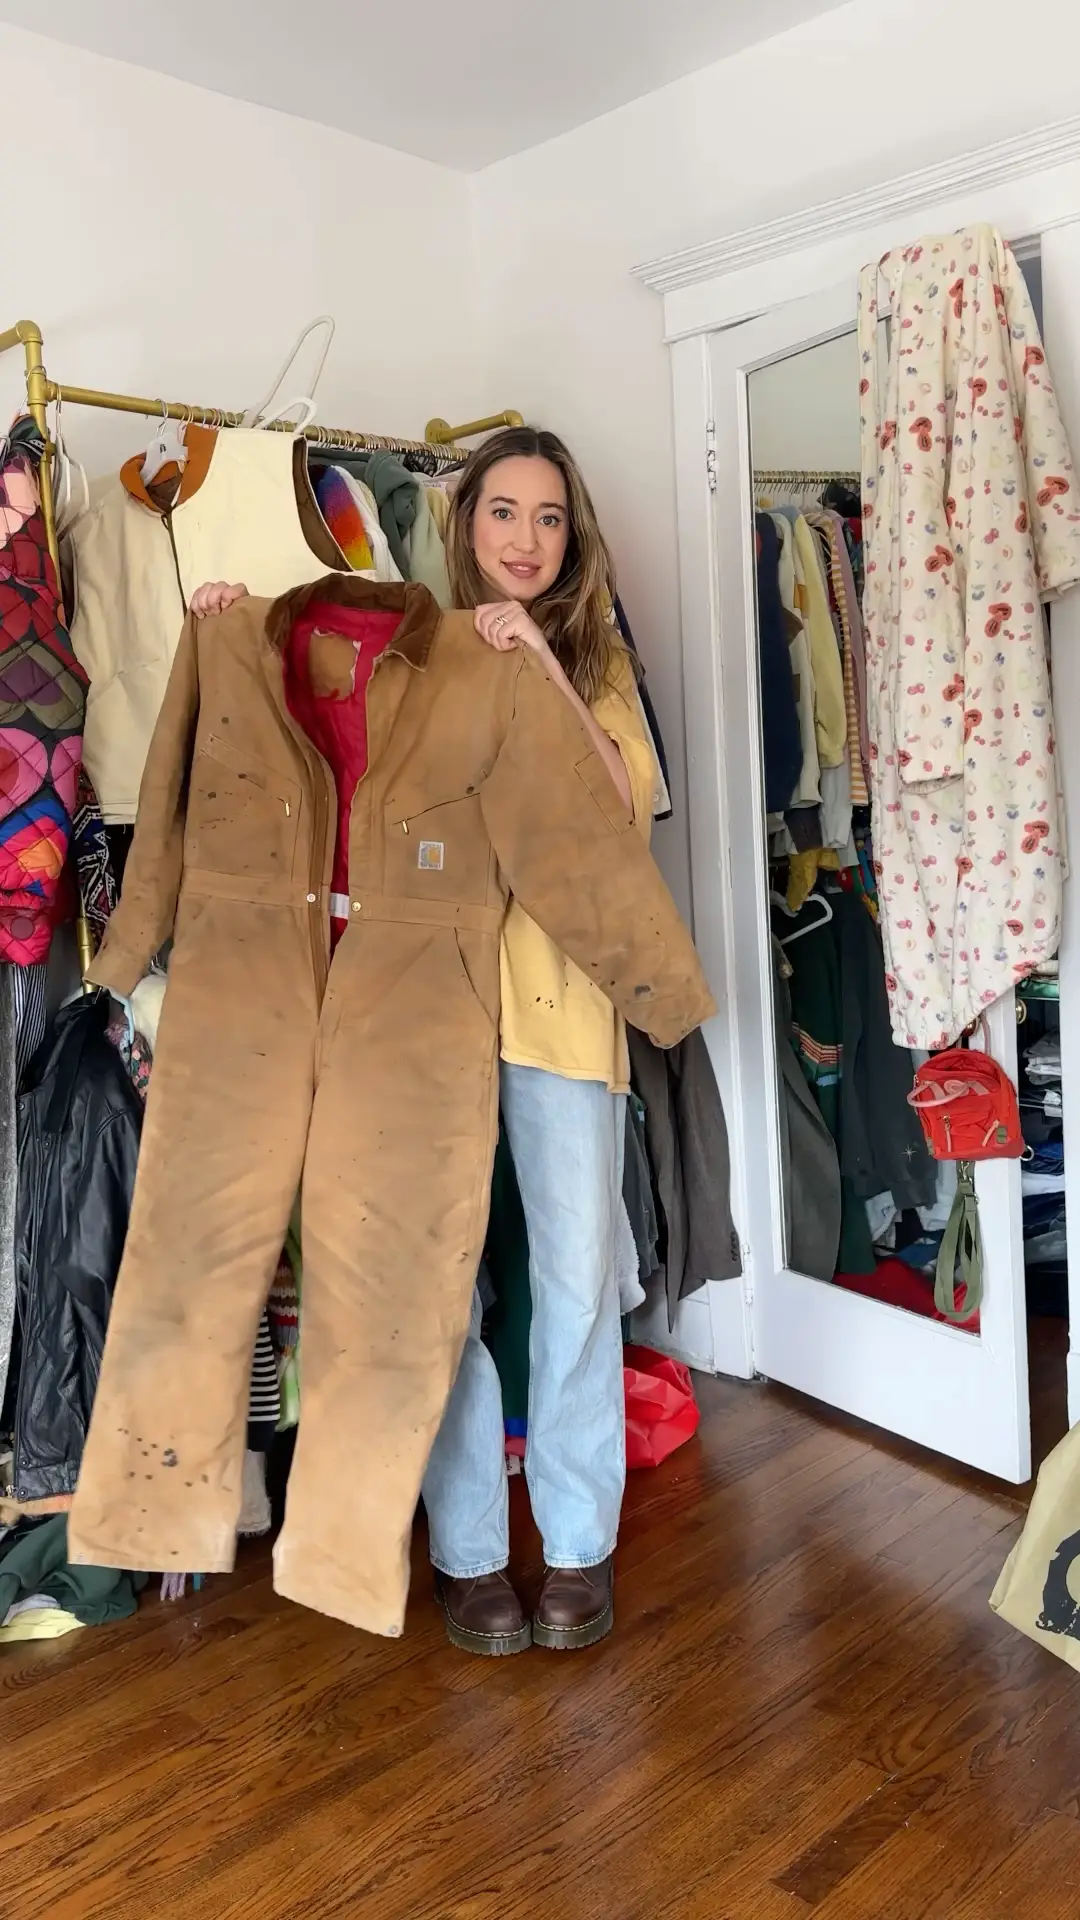 Home project must-have: Carhartt Overalls!🛠️, Gallery posted by  itsnicandrea